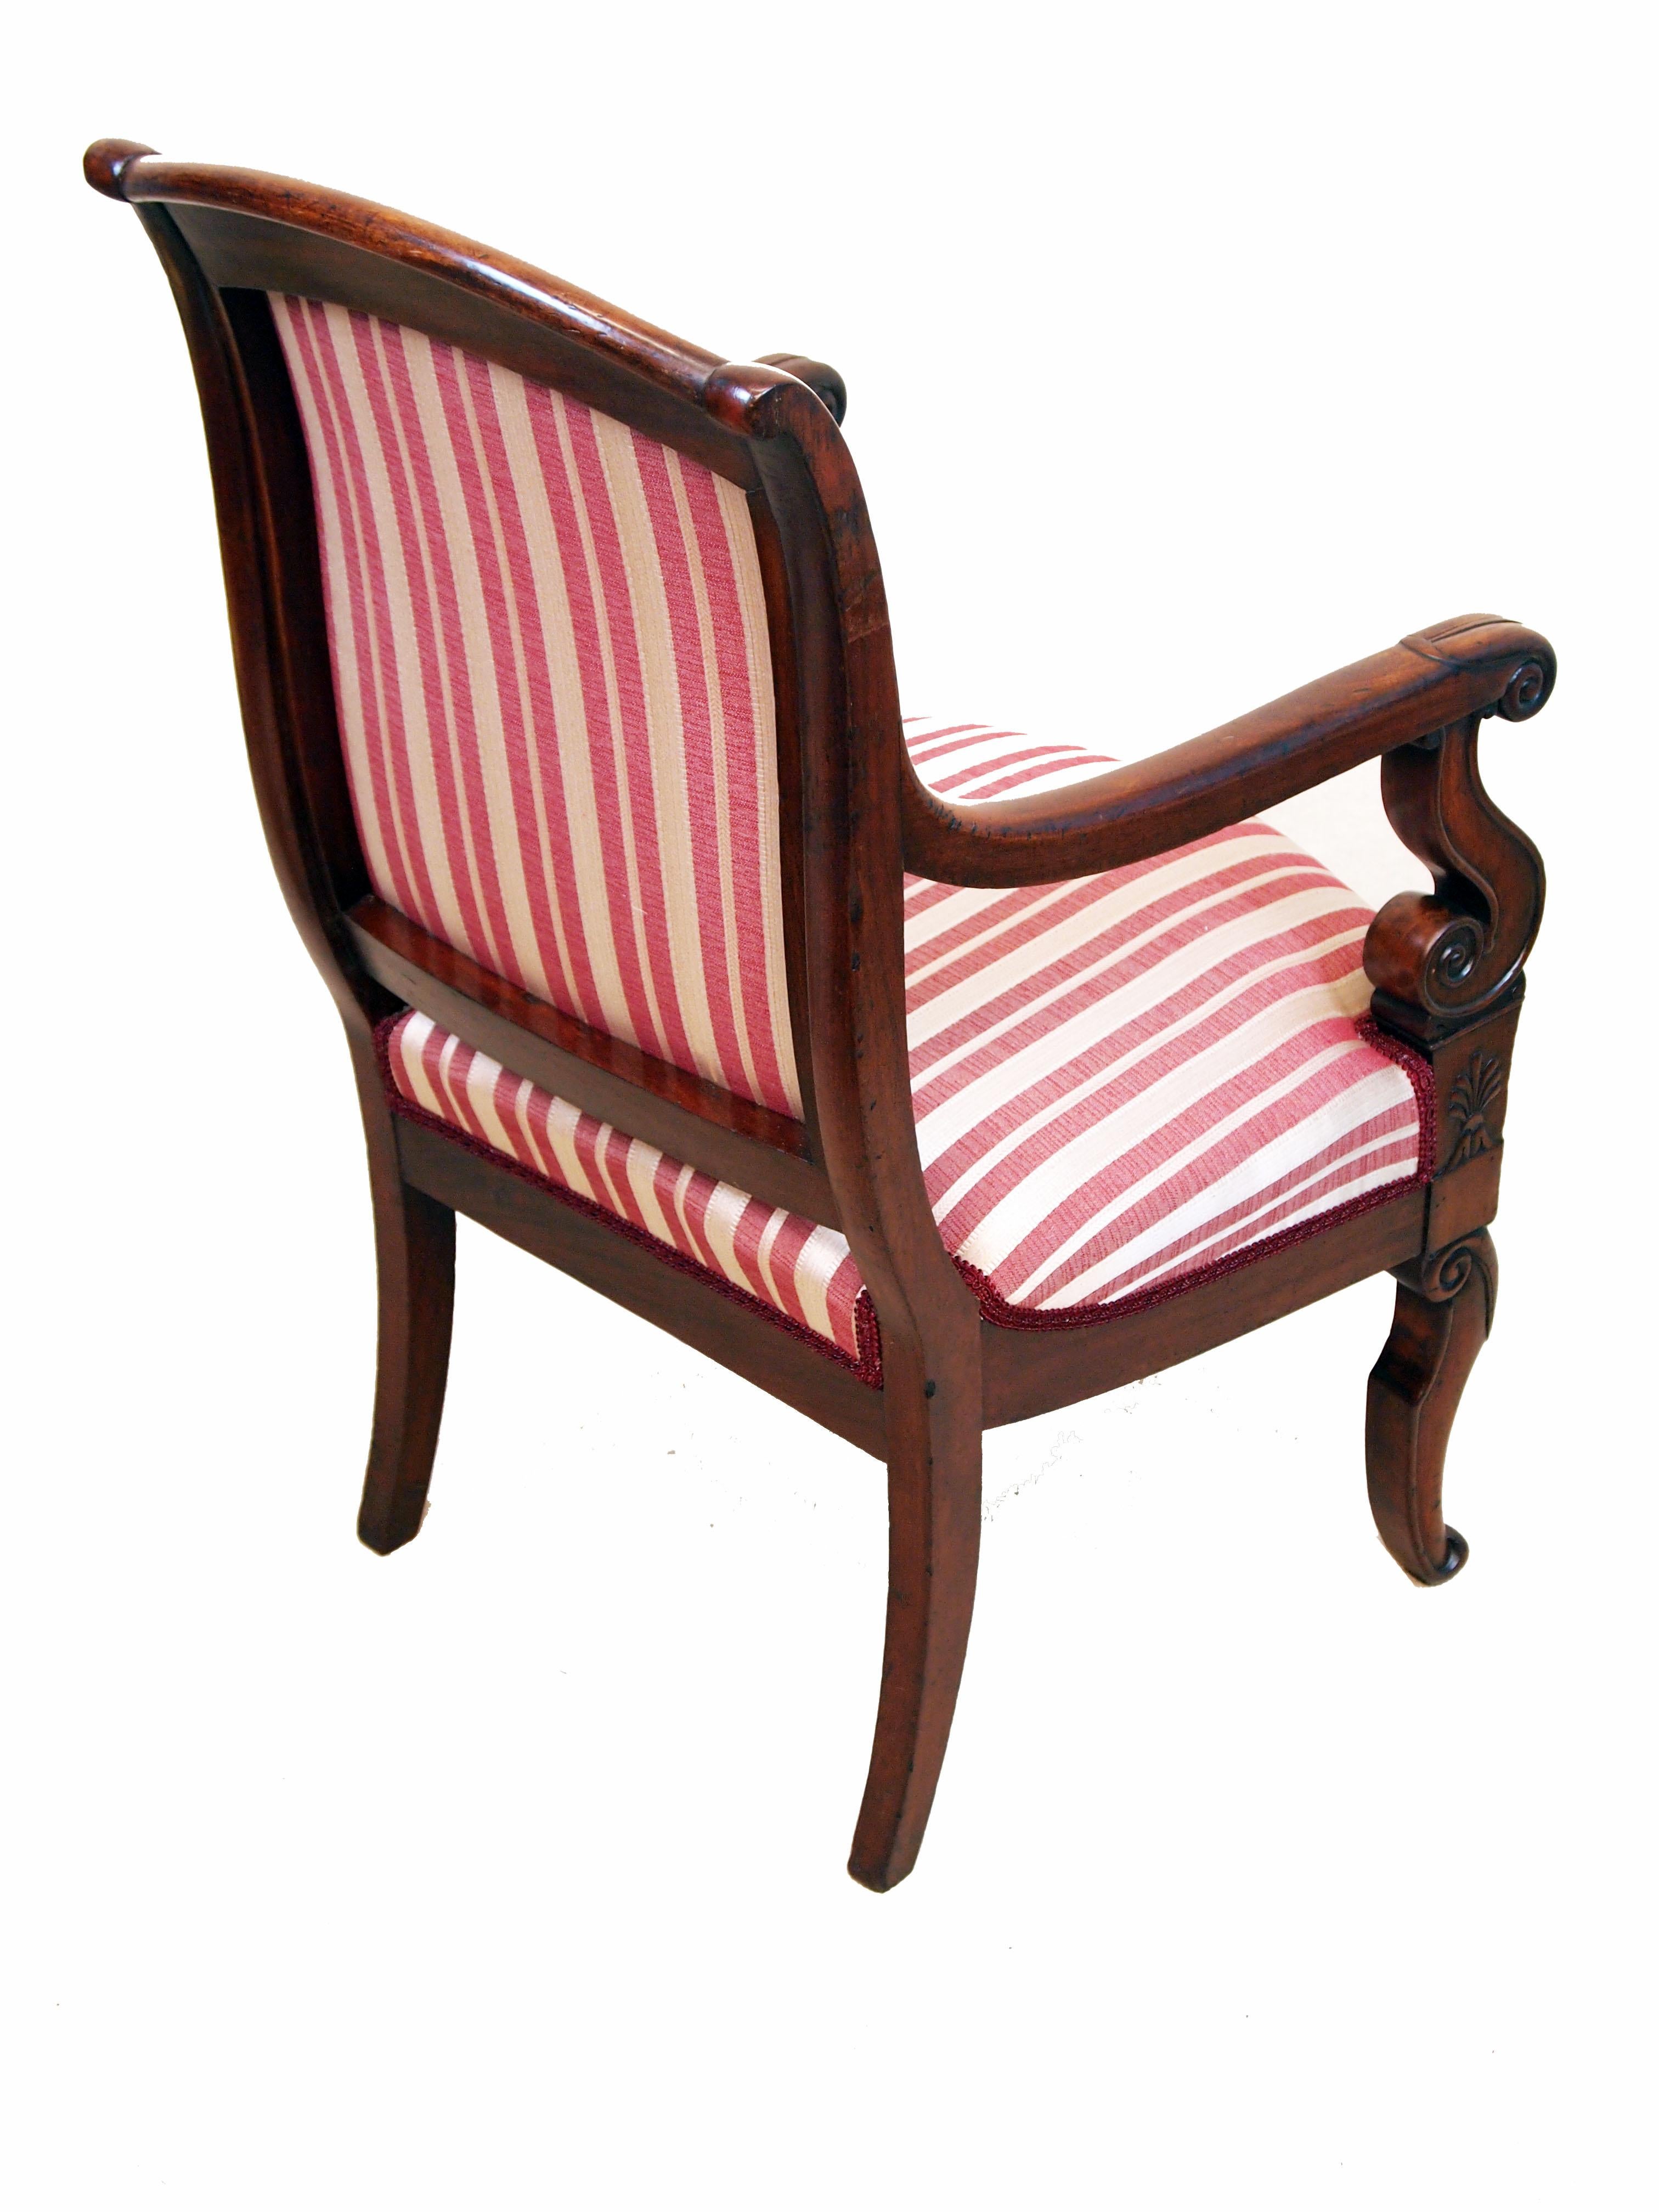 An excellent quality pair of 19th century mahogany
library armchairs, in the French empire taste, having
swept back and moulded scrolling arms with C-scroll
supports raised on elegant moulded sabre legs

(A relative typical design in the early